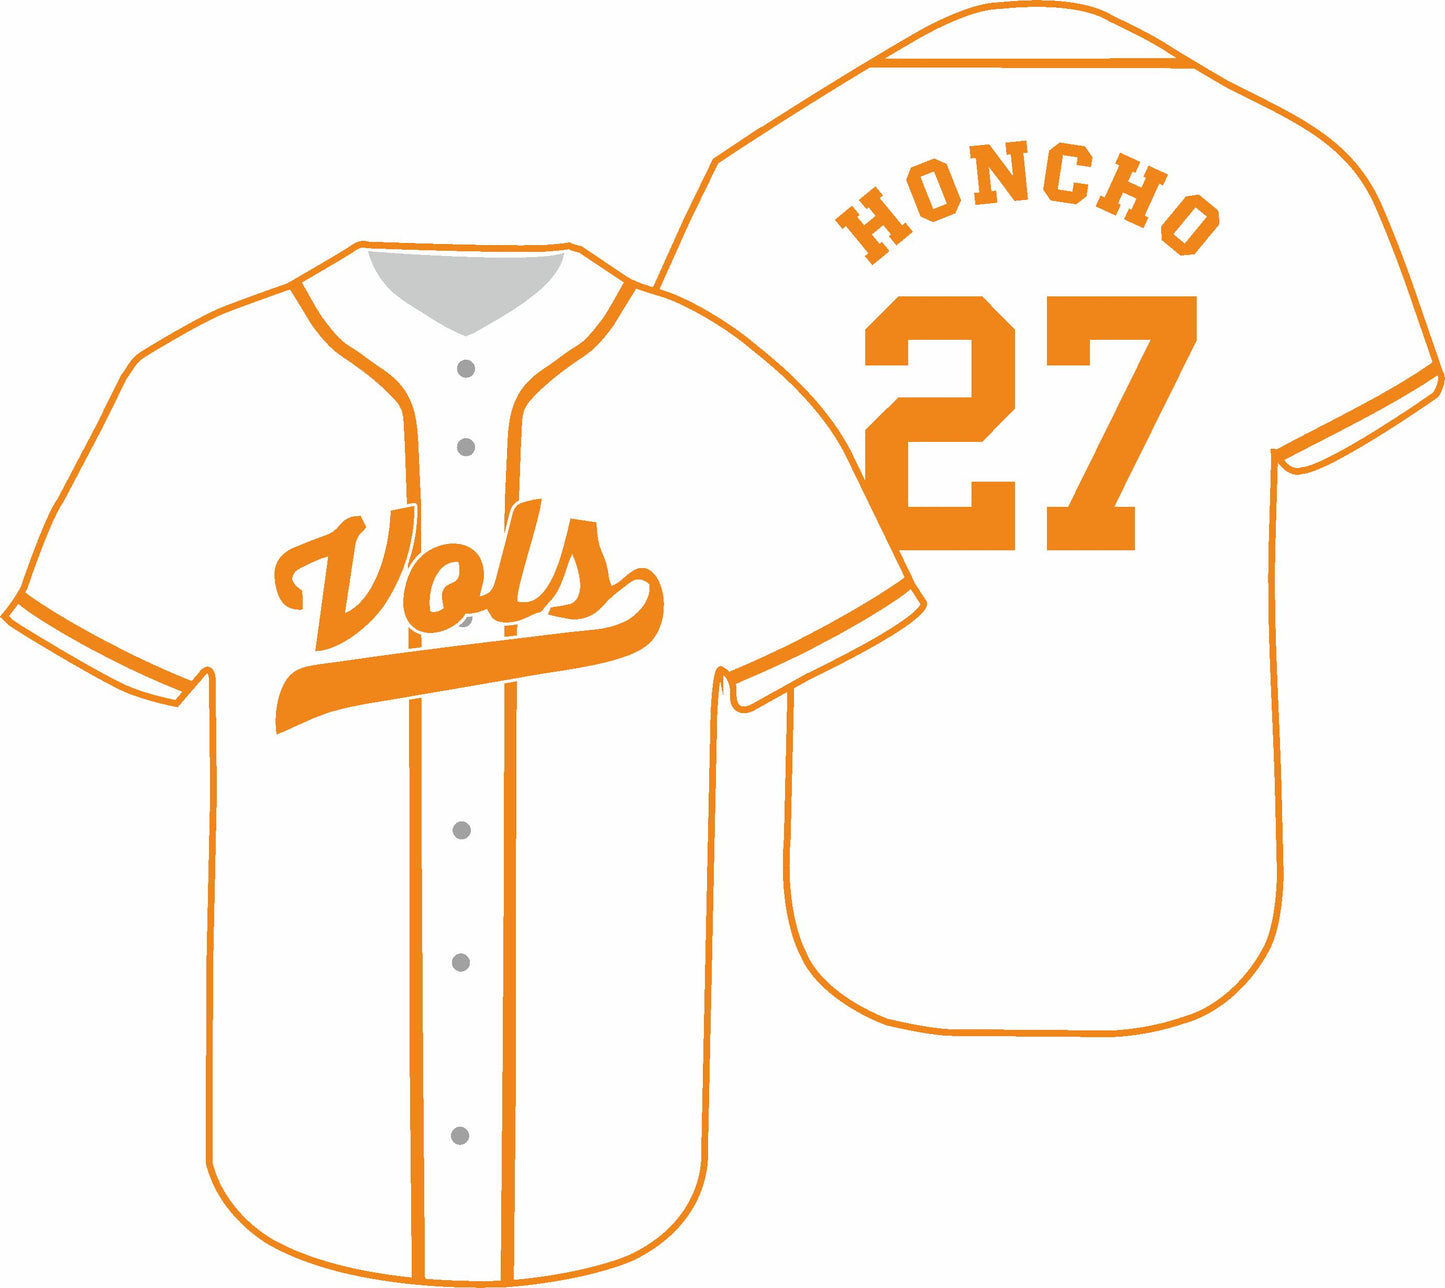 Custom Baseball Tennessee Mike Honcho Jerseys Unisex Stitched Letter And Numbers For Men Women Youth Birthday Gift